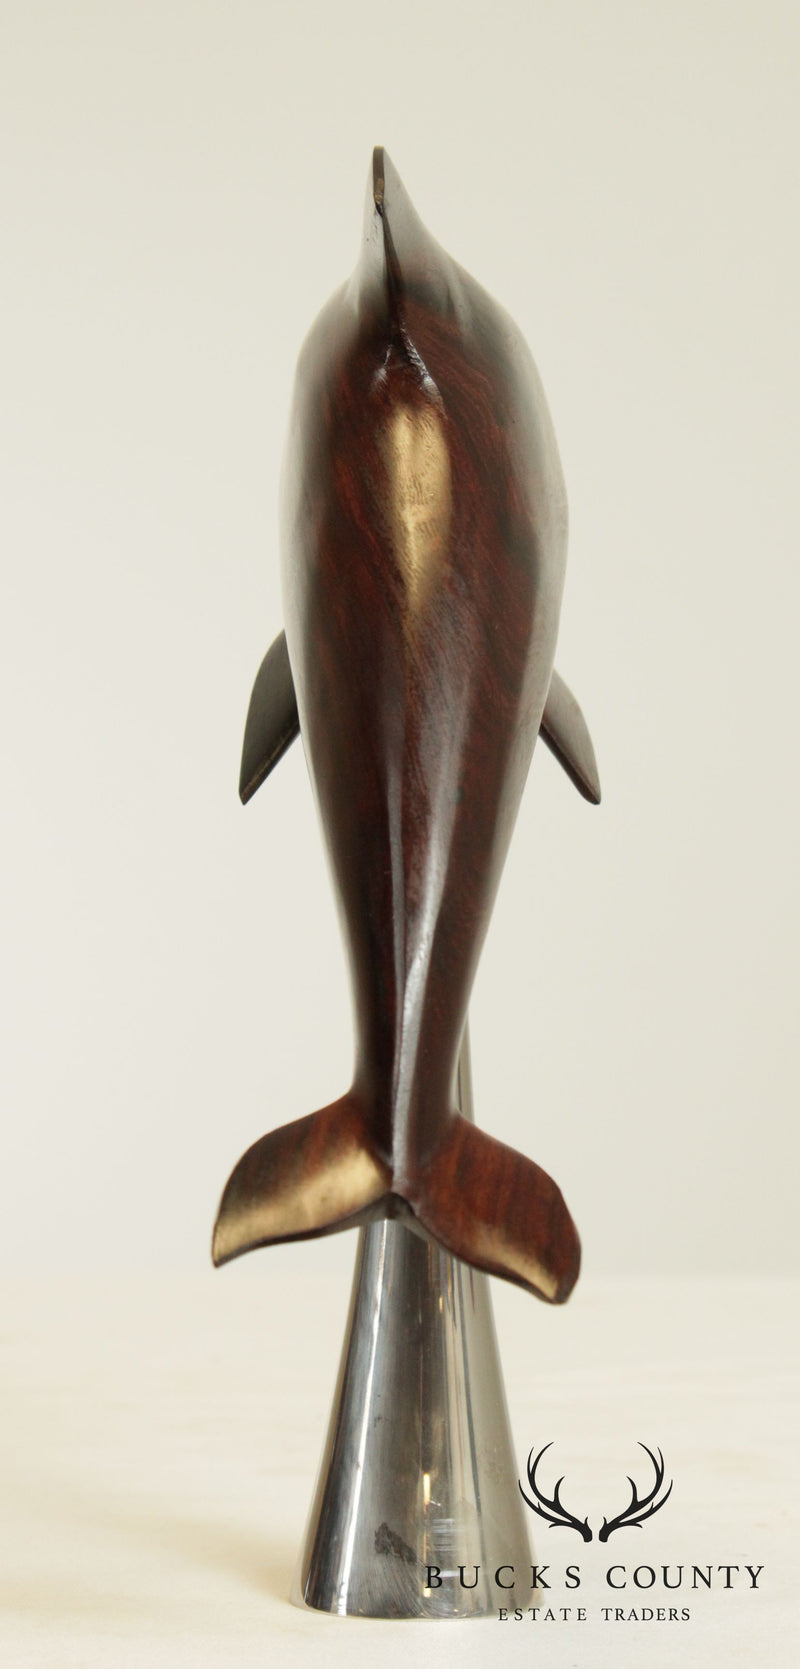 Mid Century Modern Carved Rosewood Dolphin Sculpture on Chrome Base